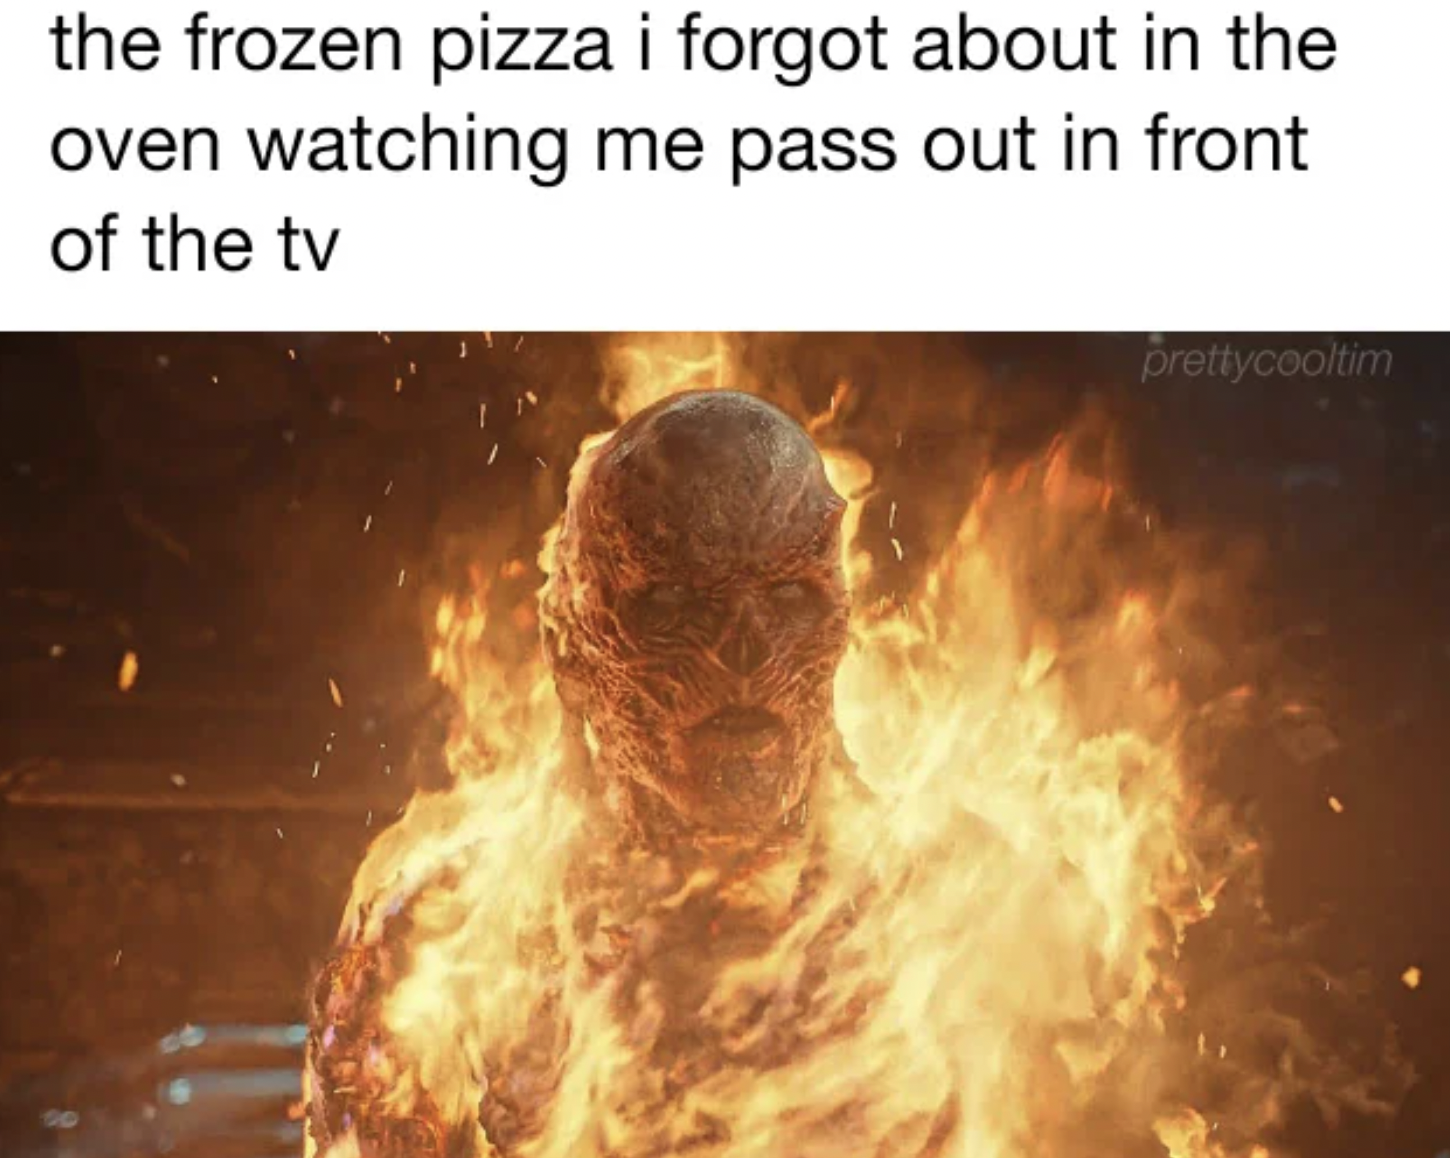 Dank Memes - bro quotes - the frozen pizza i forgot about in the oven watching me pass out in front of the tv prettycooltim